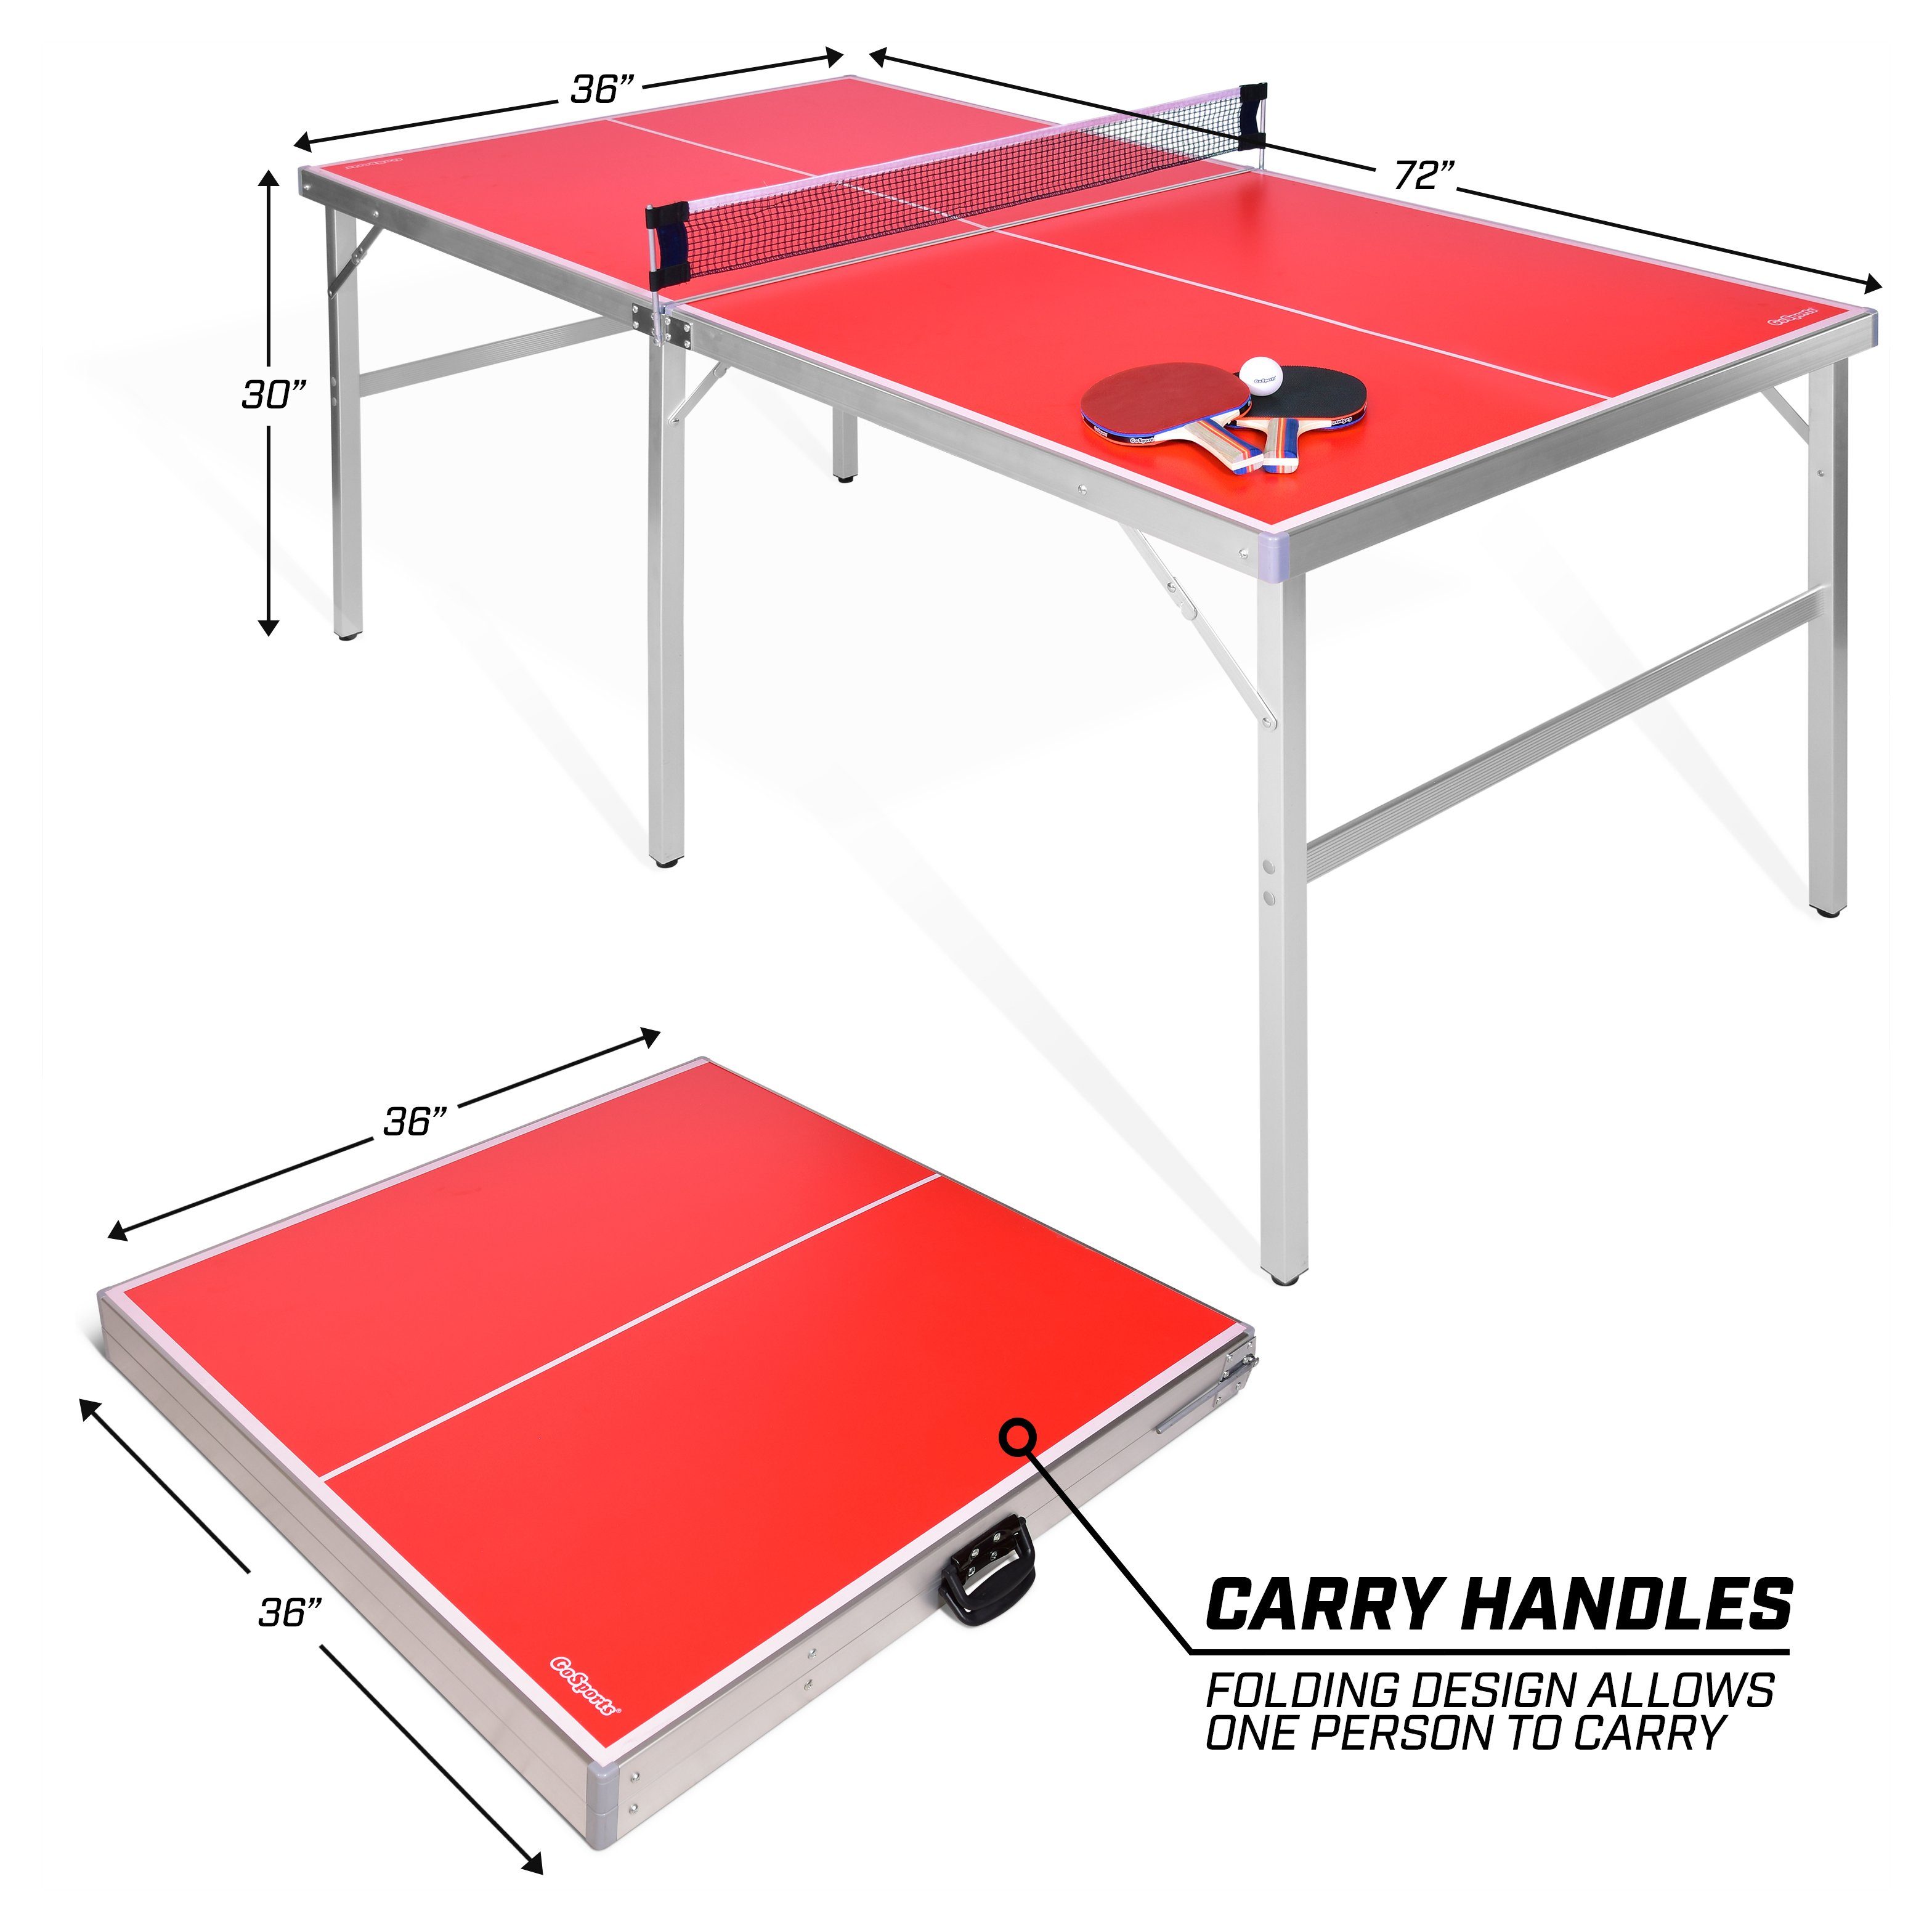 GoSports 6 ft x 3 ft Mid-size Table Tennis Game - Red